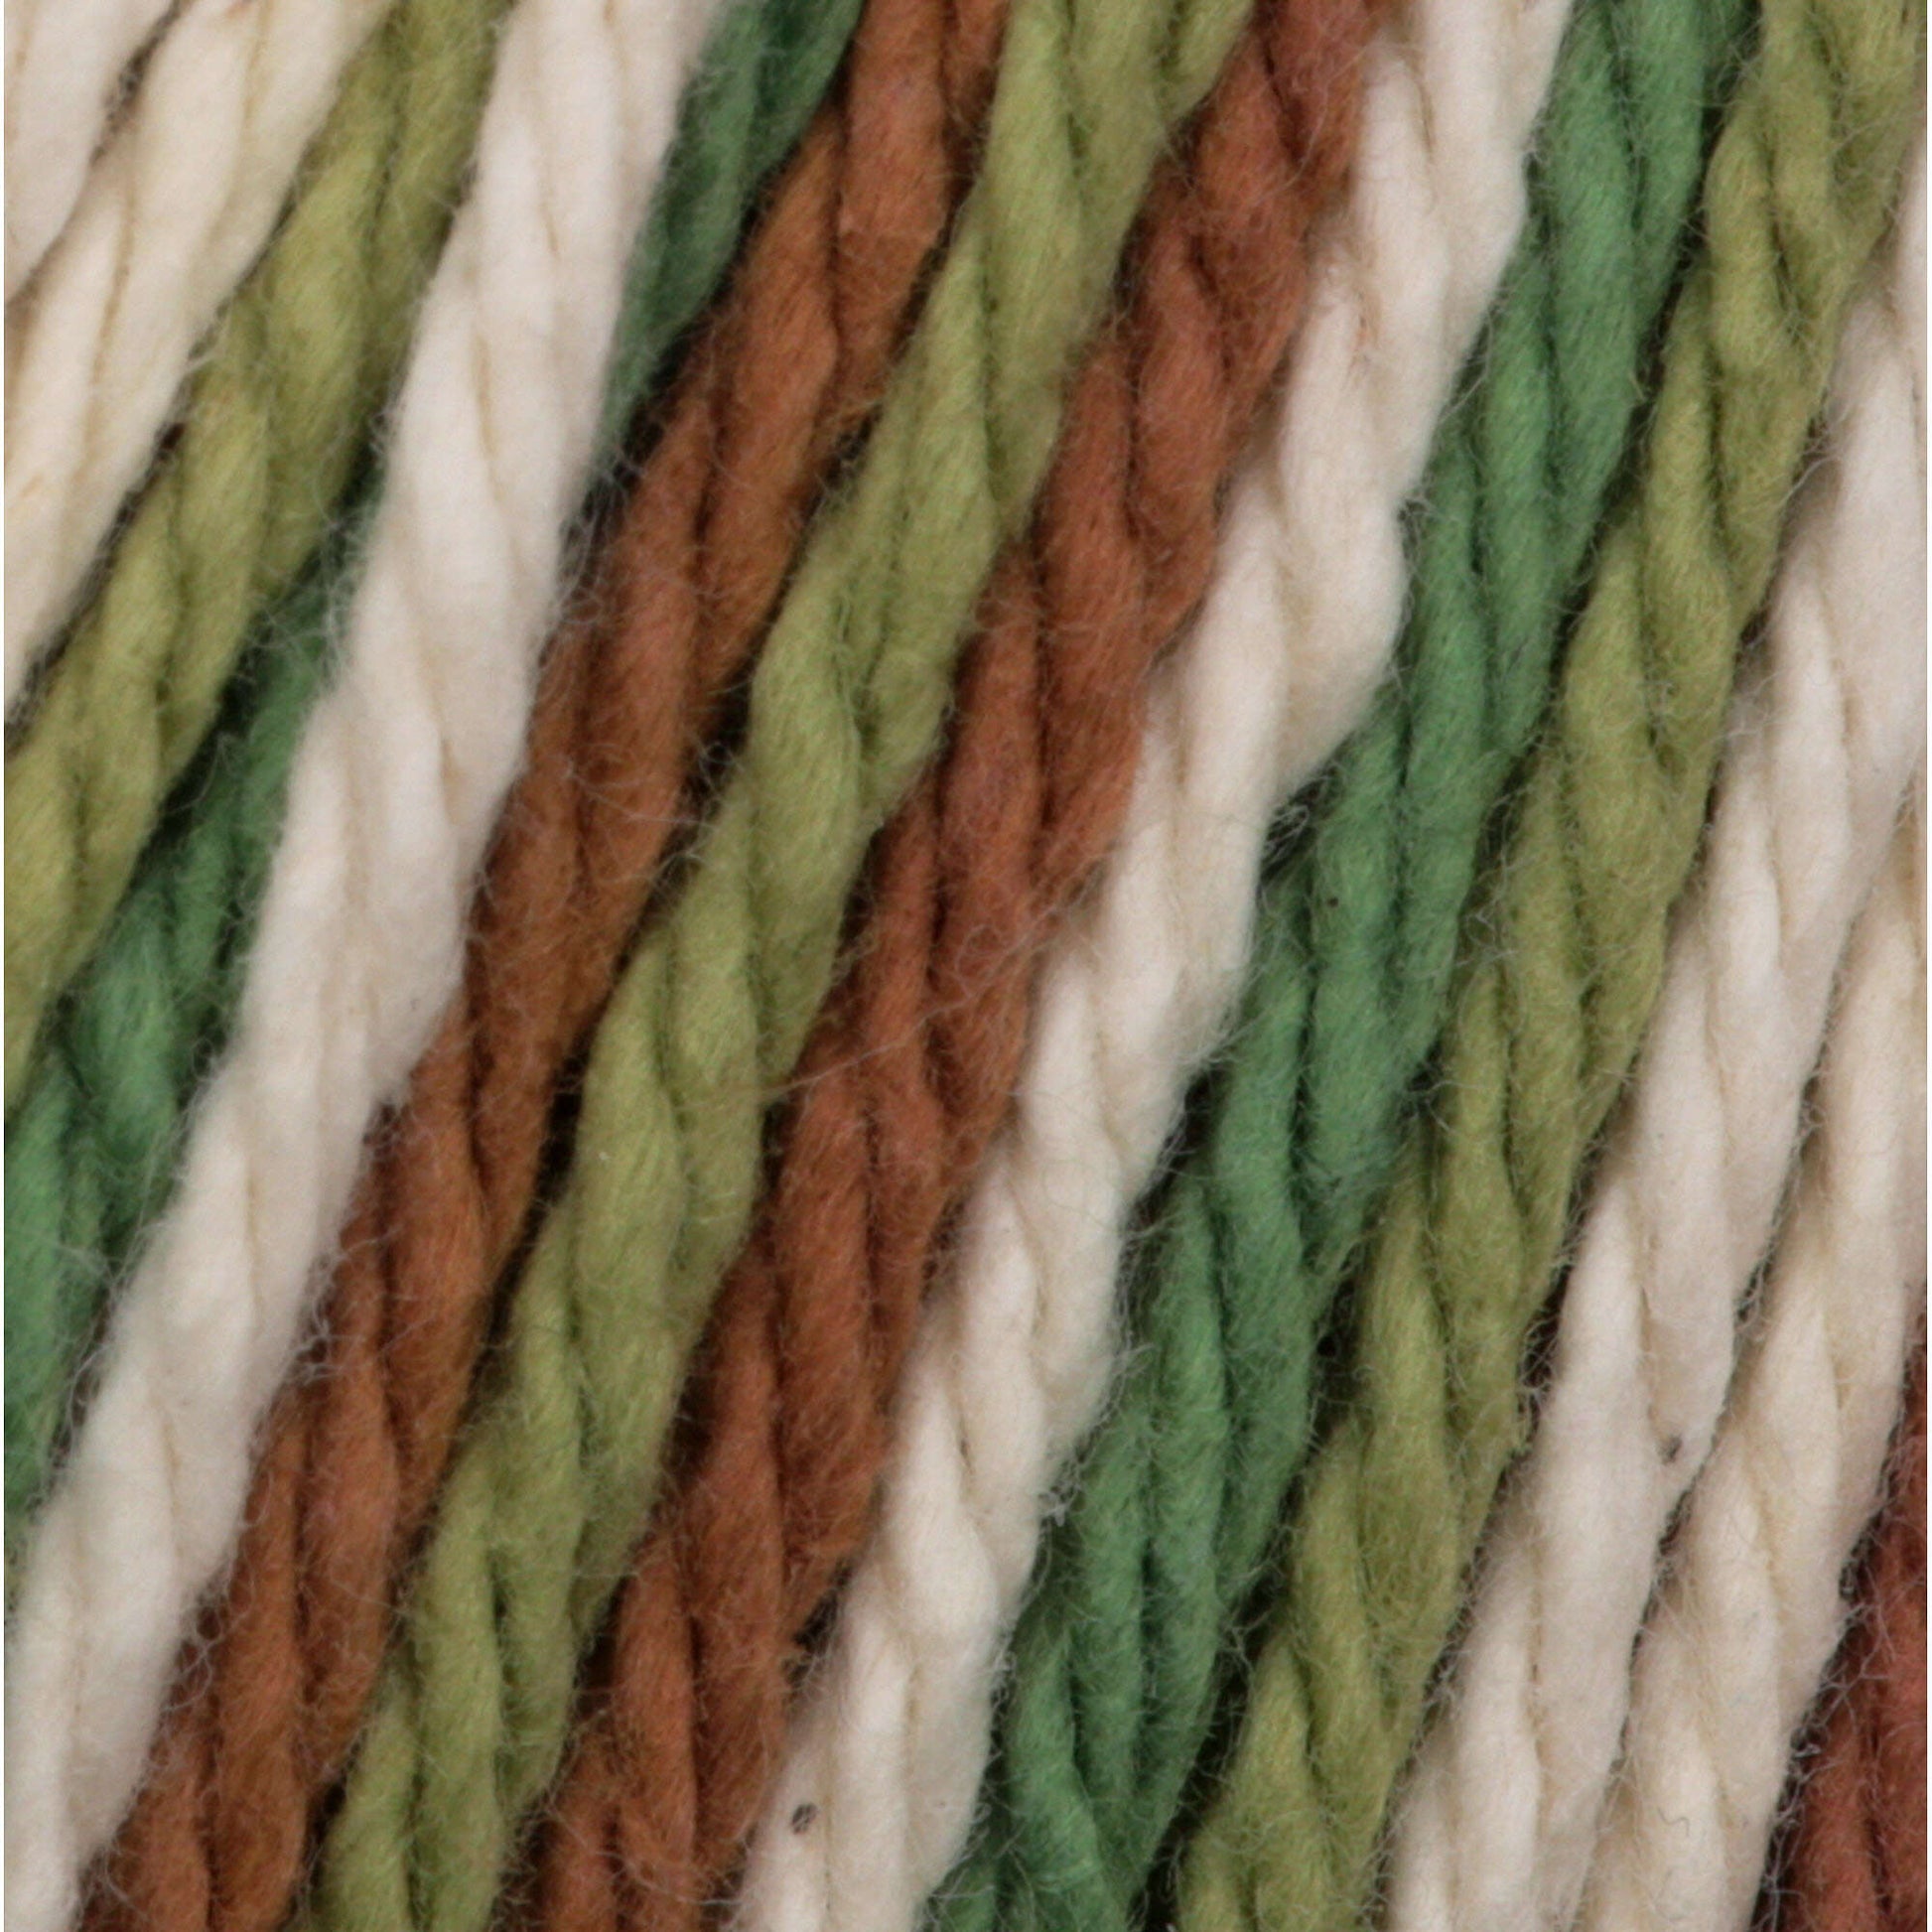 Lily Sugar'n Cream Yarn - Ombres Super Size-Renegade, 1 count - Pay Less  Super Markets